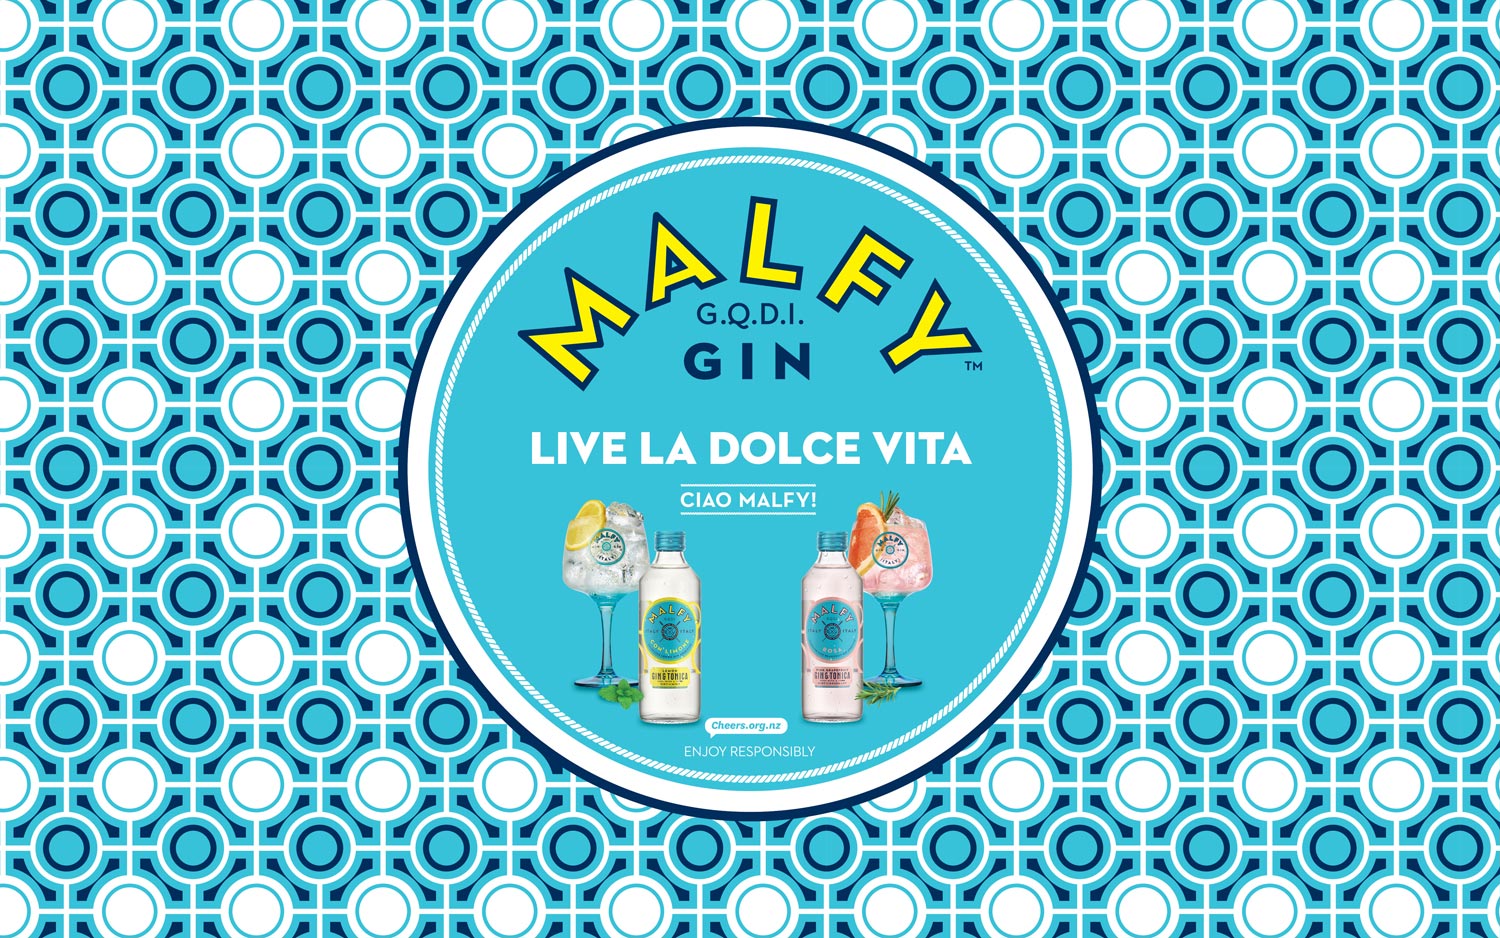 Maly Gin brand texture with products